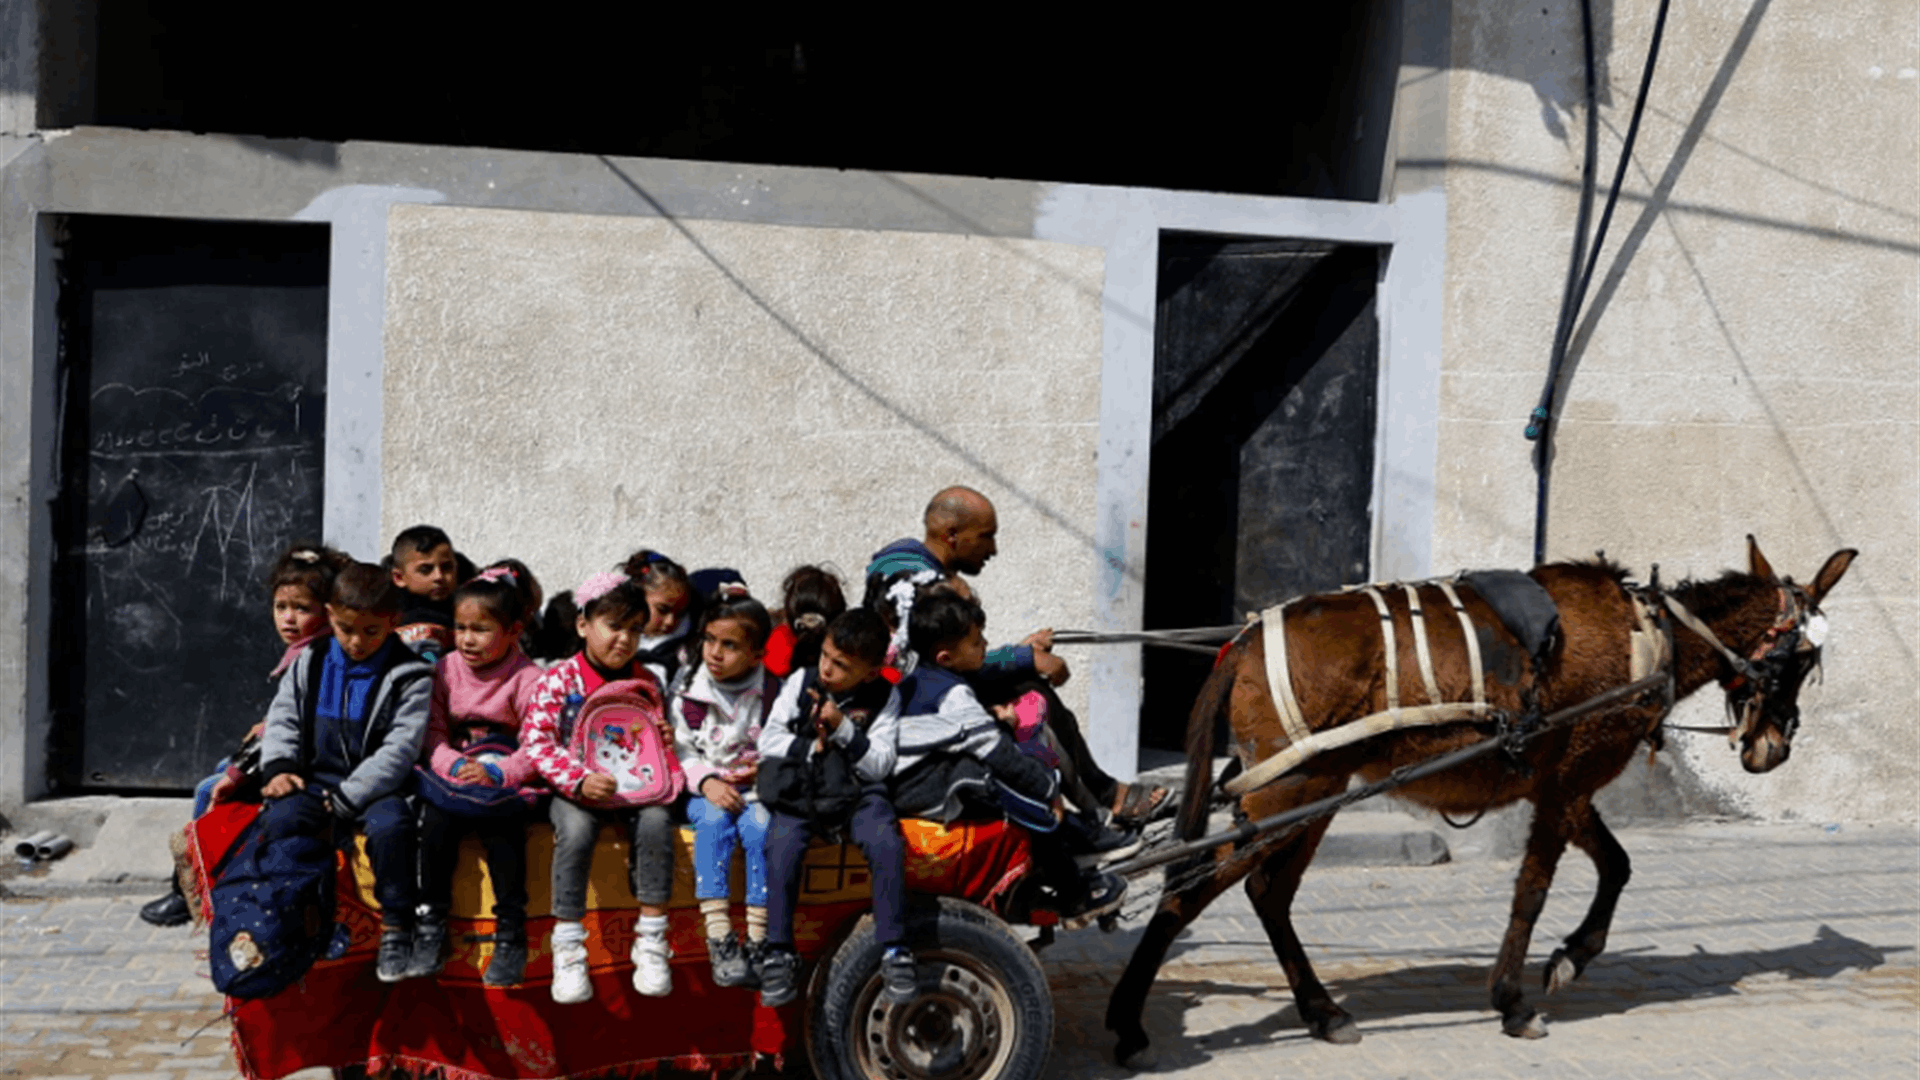 For some Gaza kids, a donkey cart is the only way to class